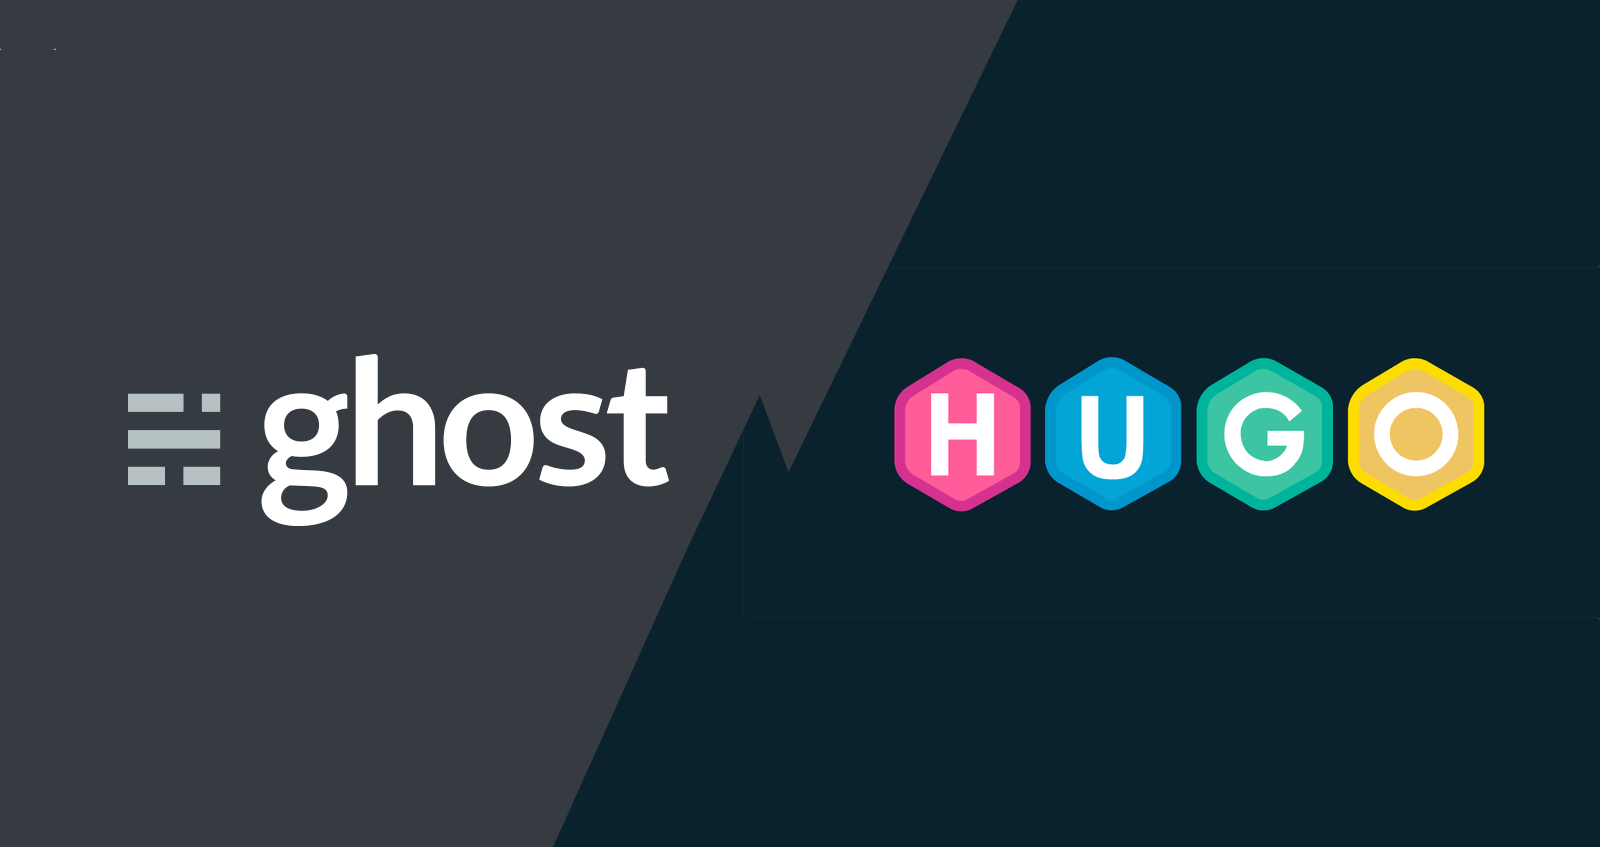 From GhostCMS to Hugo - Snipline's New Blog